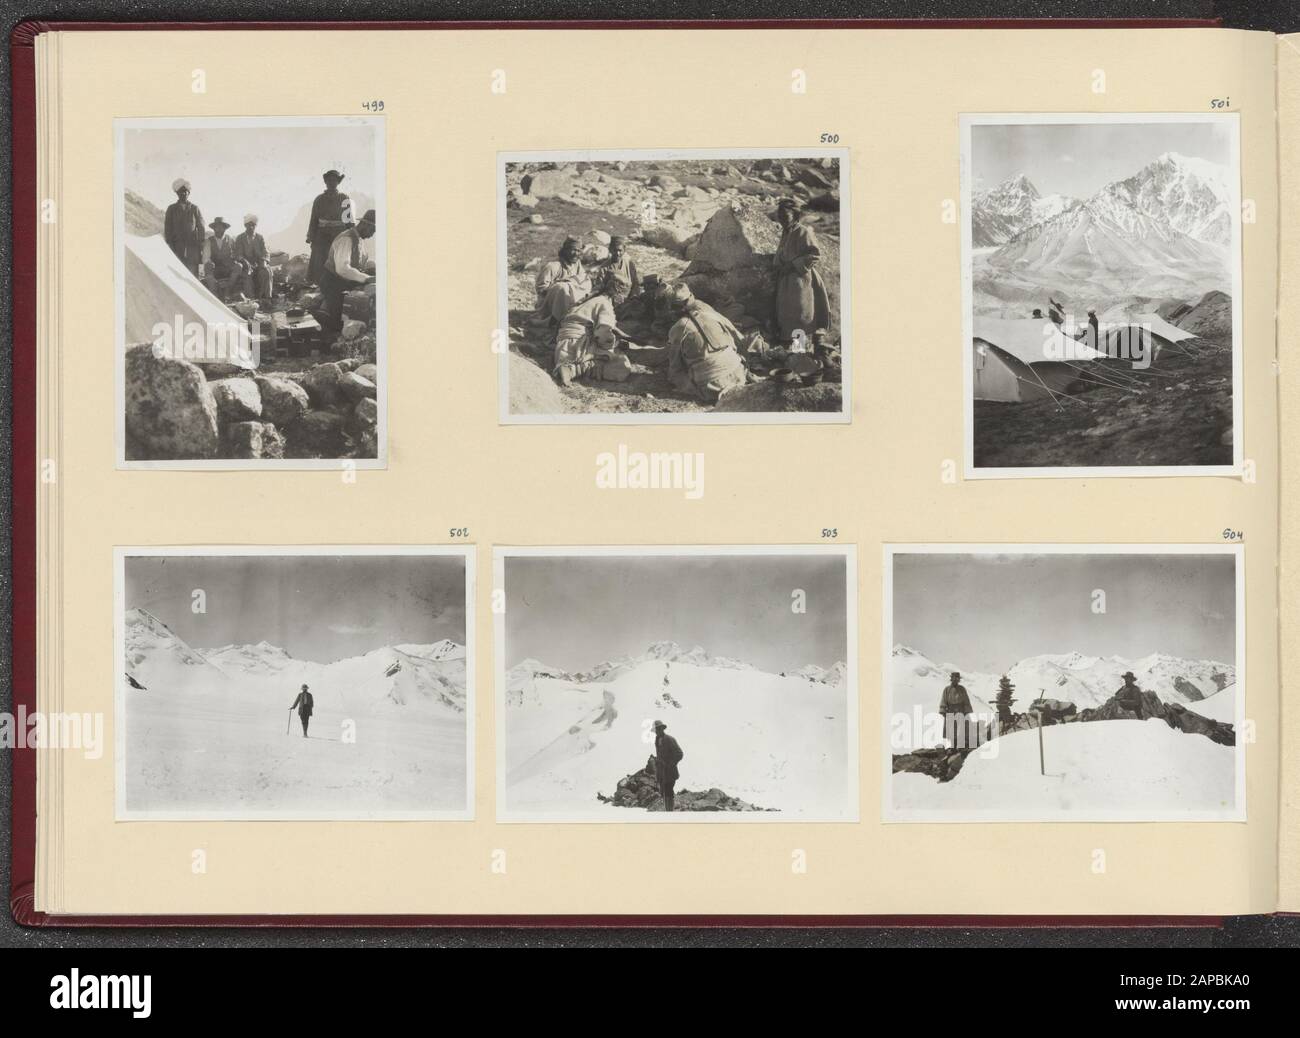 Photoalbum Fisherman: First Karakoru expedition, 1922 Description: Album sheet with six photos. Top left: the field kitchen in the camp in the Lashi valley; upper middle: the coolies playing the dice; upper right: the camp in the Gangmolung valley; lower left: Ph.C. Fisherman on the Gangmolung glacier; lower middle: Ph.C. Fisherman on a pass at the end of the Gangmolung glacier; lower right: coolies at the view from the highest peaks of the Sasir Pass Date: 1922/08/11 Location: India, Karakorum, Pakistan Keywords: mountains, glaciers, kitchens, tents Personal Name: Fisherman, Ph.C. Stock Photo